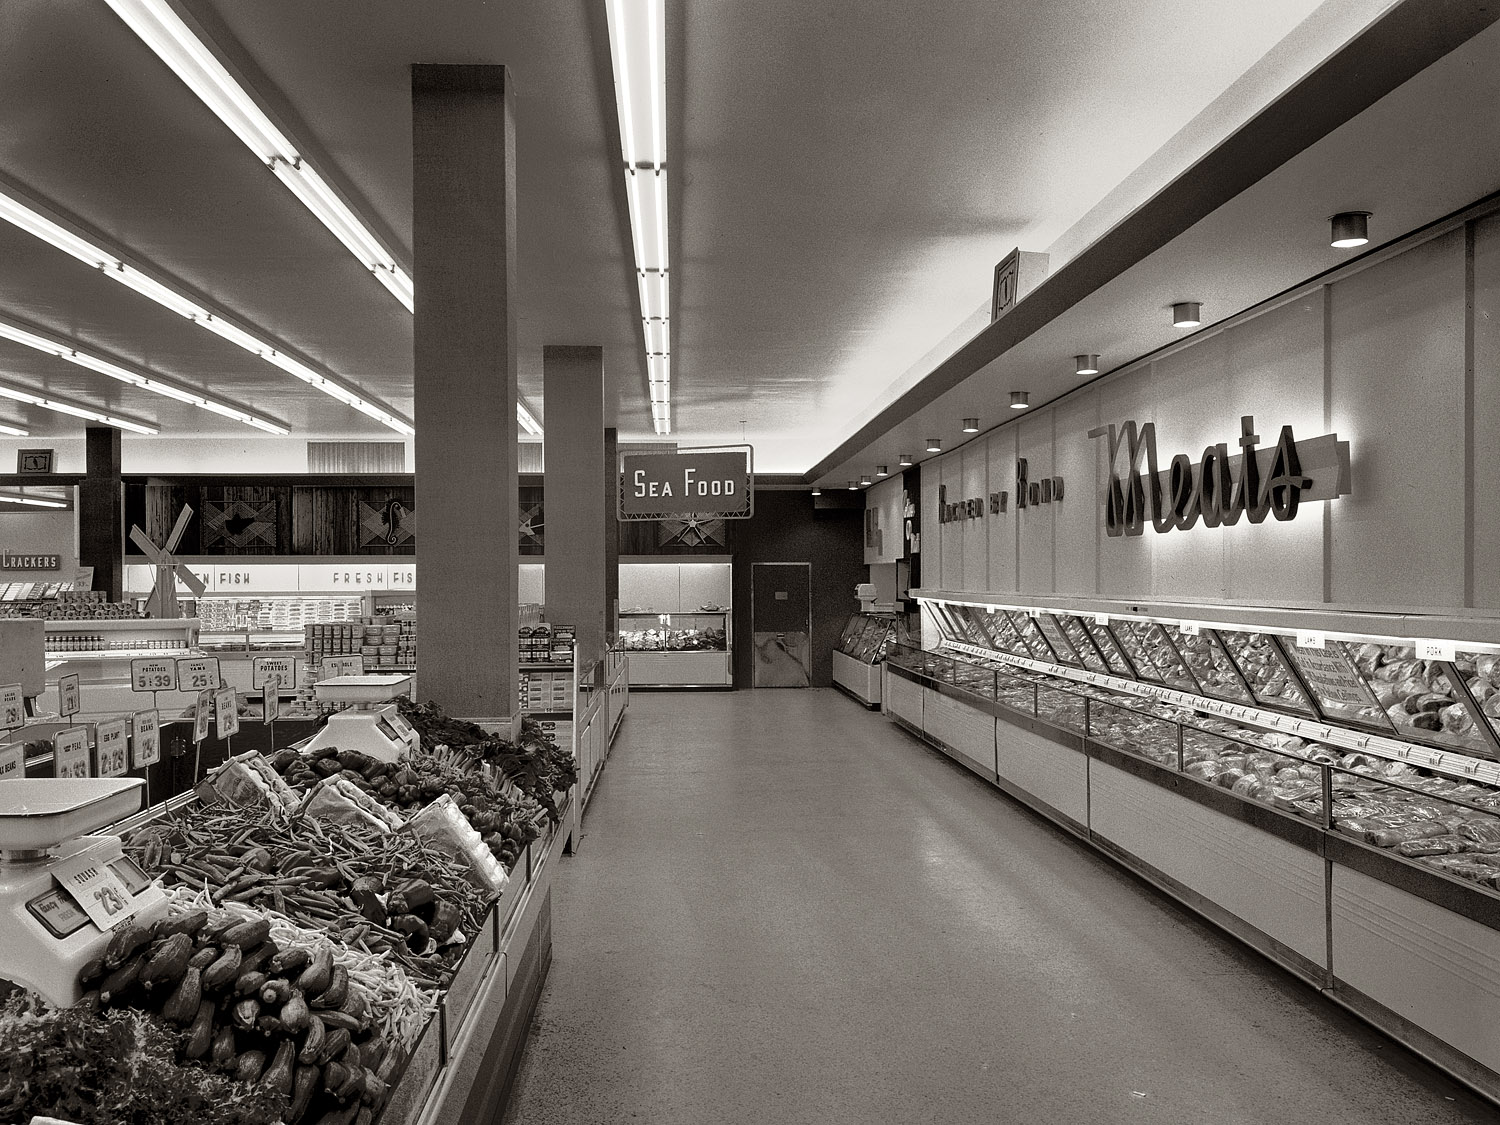 April 29, 1952. The Grand Union supermarket at 100 Broadway in East Paterson, New Jersey. View full size. 4x5 inch acetate negative by Gottscho-Schleisner.